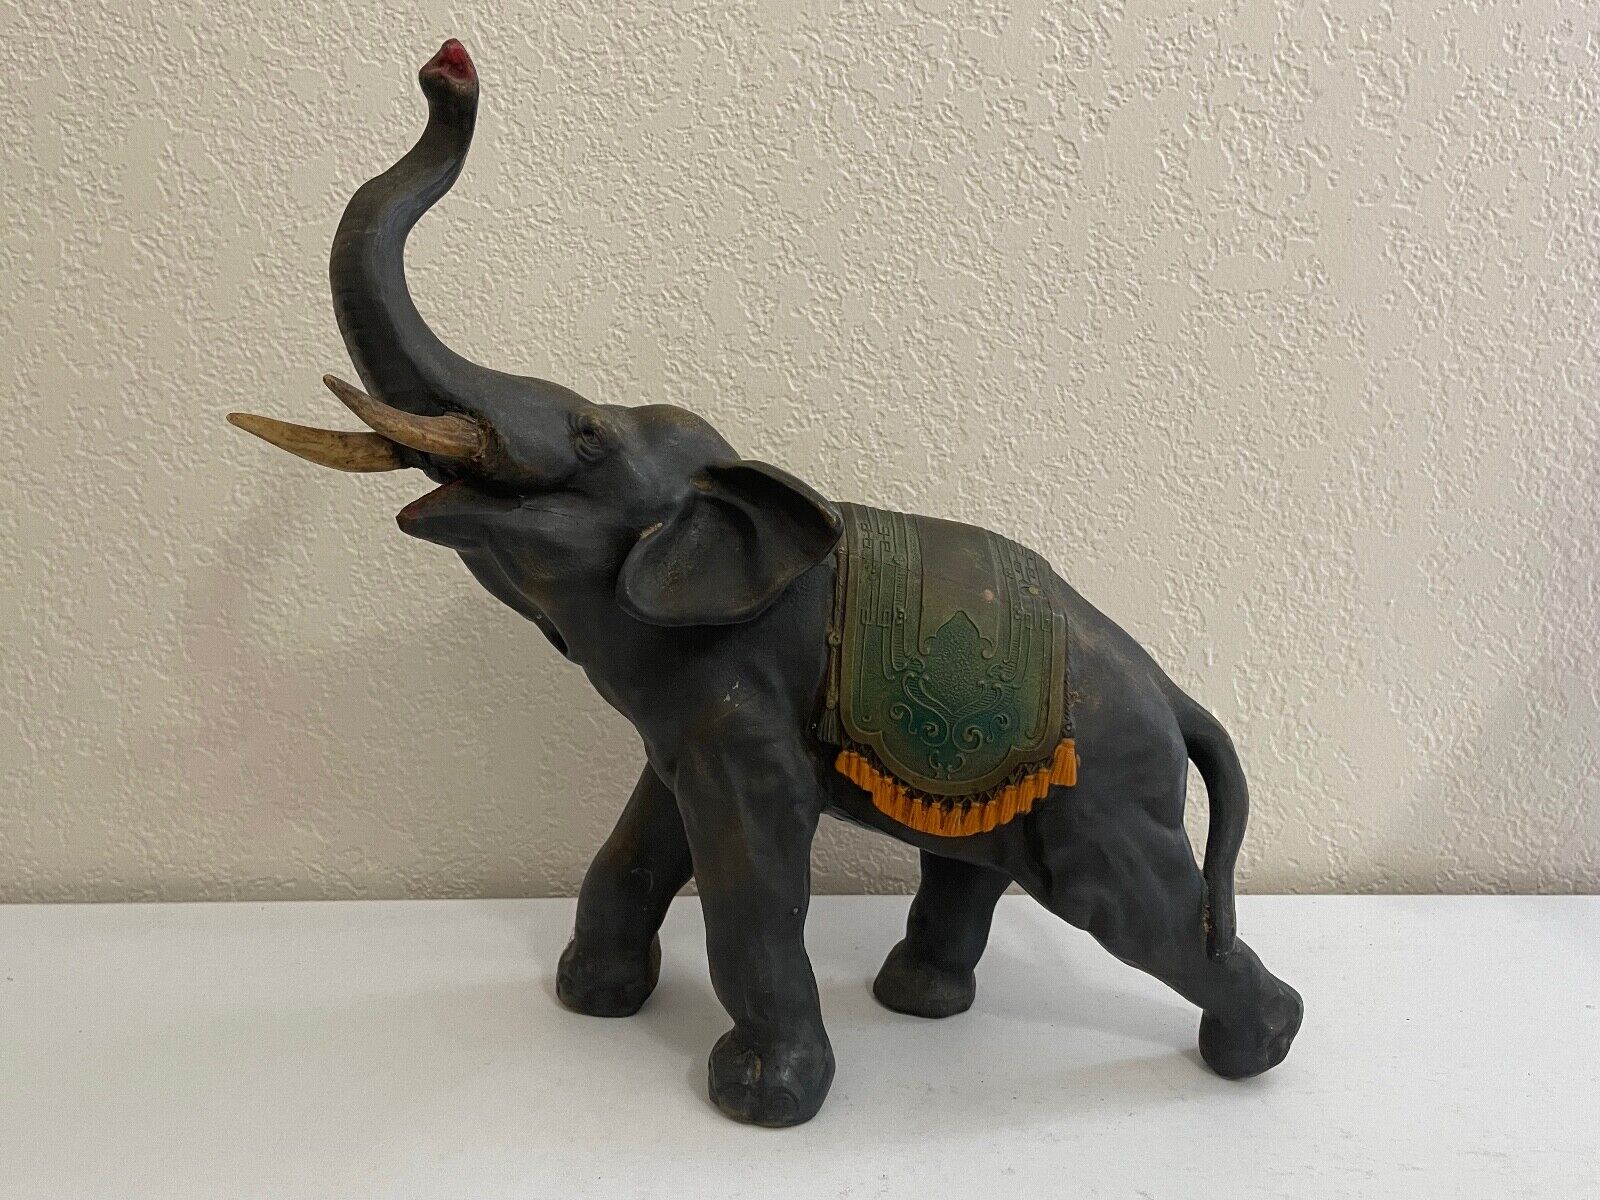 Vintage Antique Spelter Metal Sculpture Statue of Elephant with Trunk Up